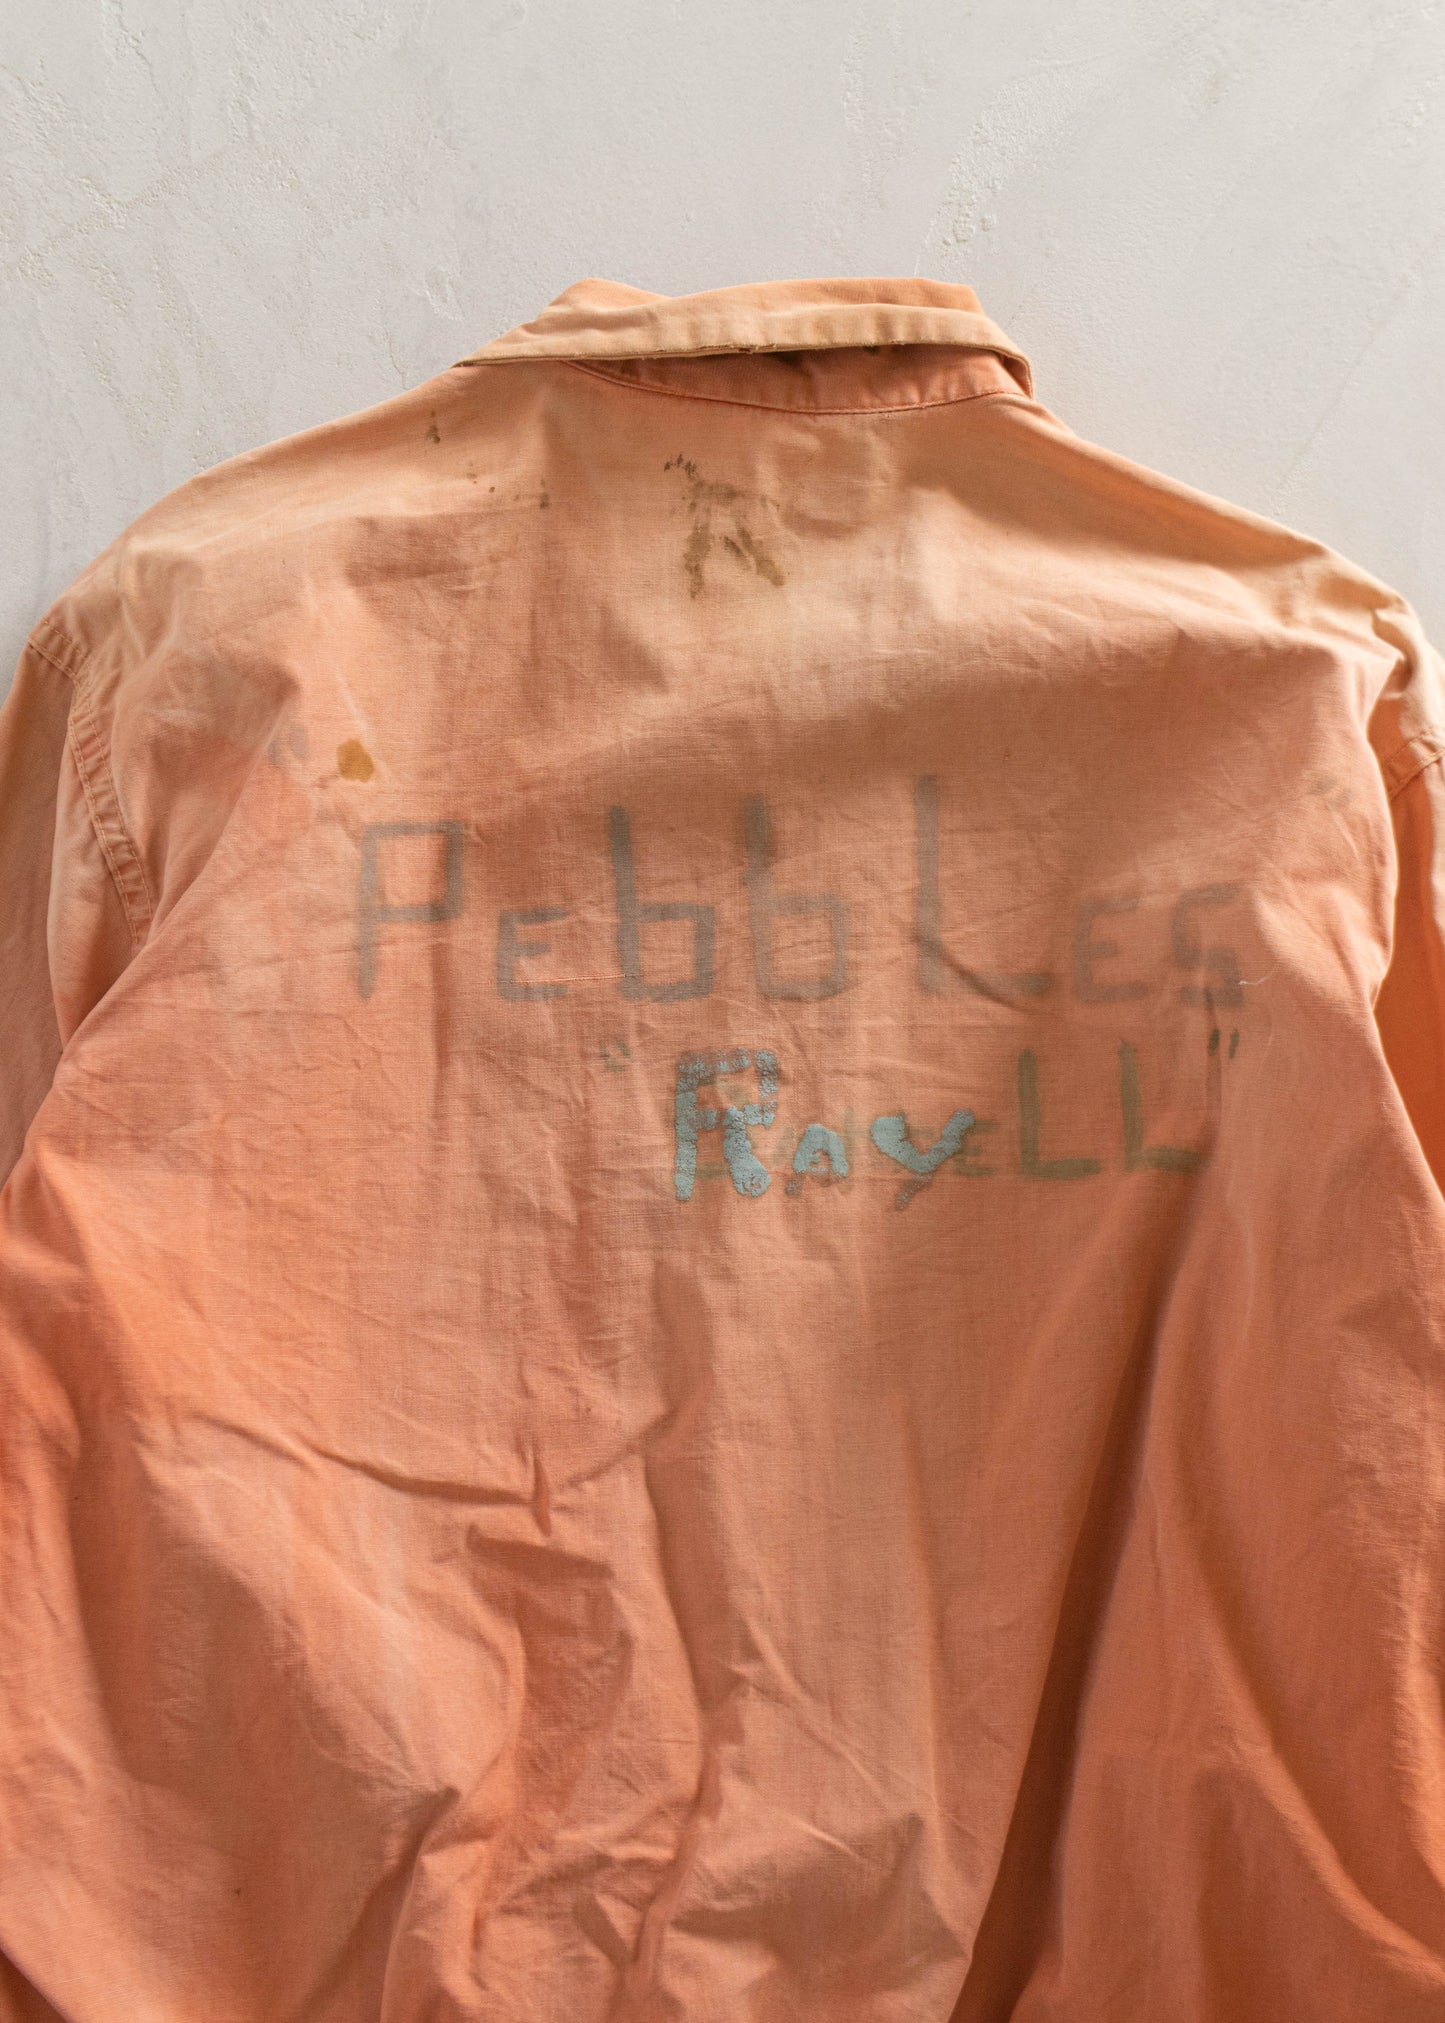 1950s Pebbles Ray Sun Faded Gas Jacket Size S/M